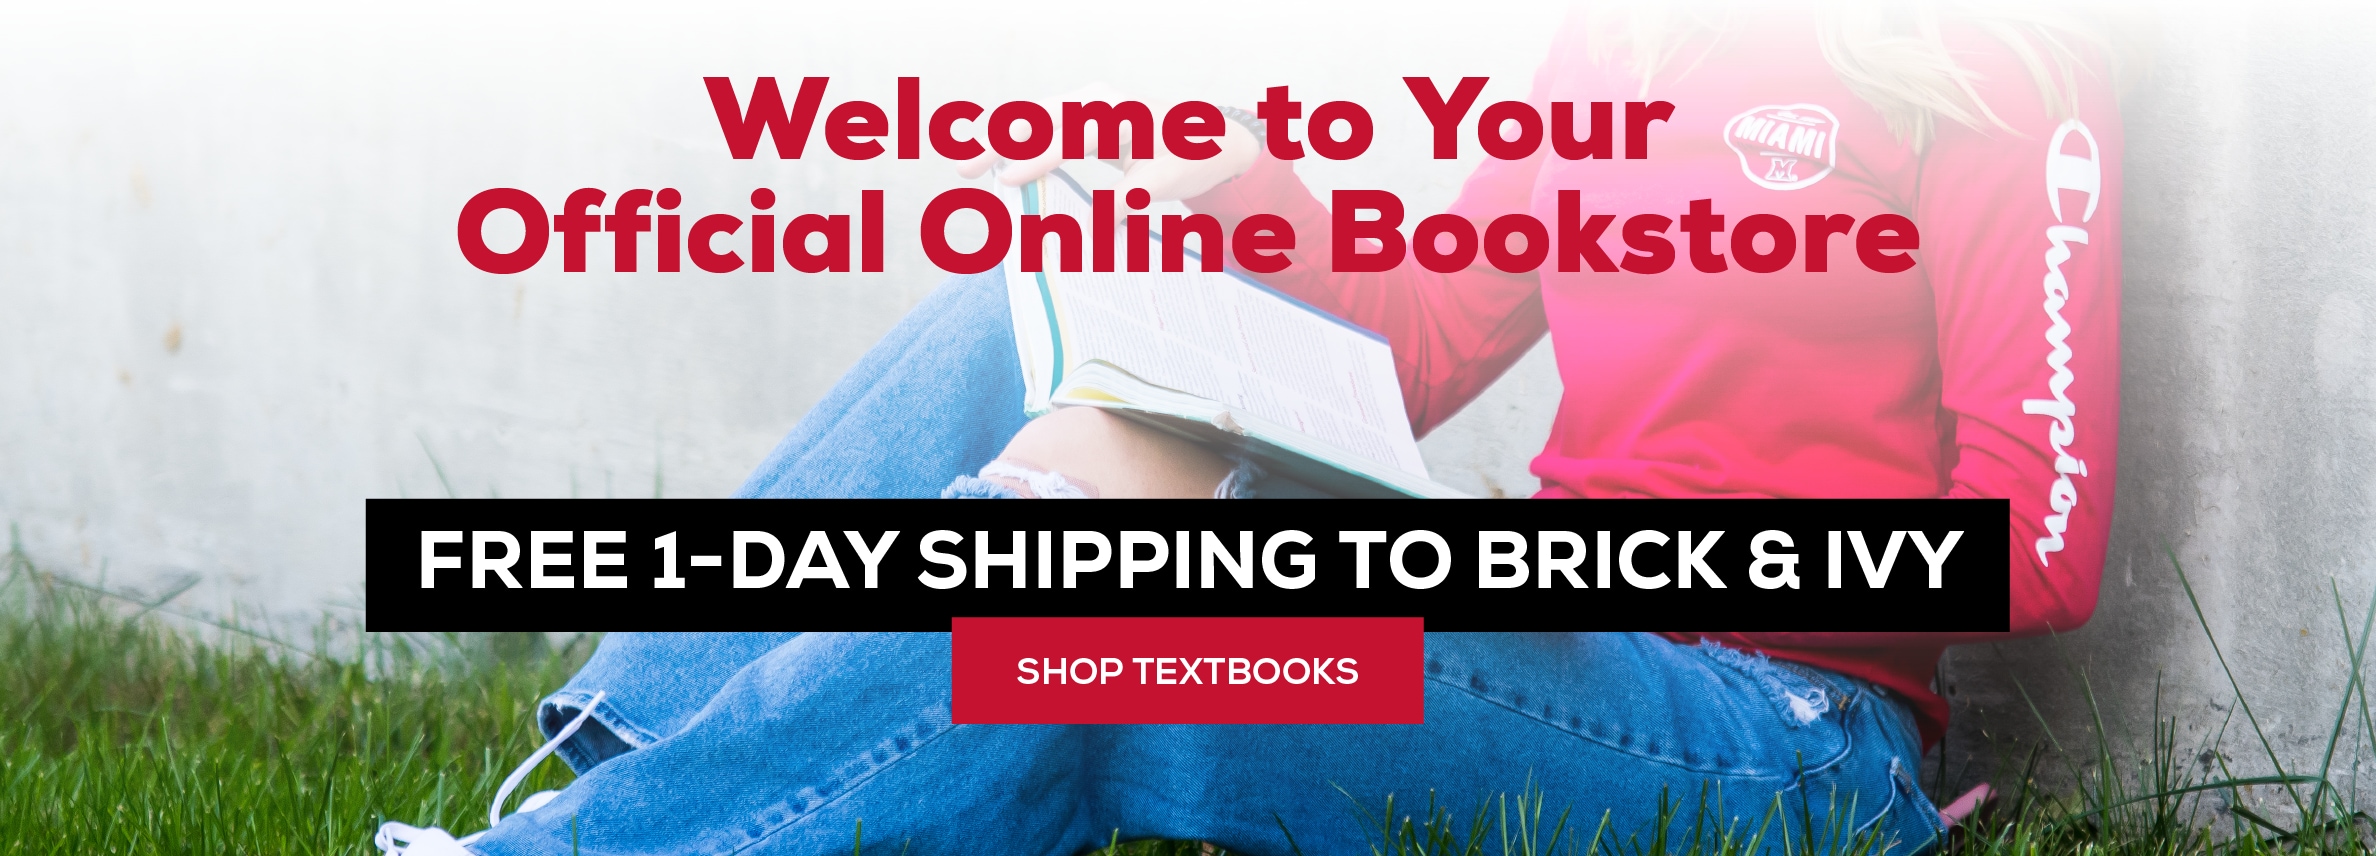 Welcome to Your Official Online Bookstore FREE 1-DAY SHIPPING TO BRICK & IVY SHOP TEXTBOOKS